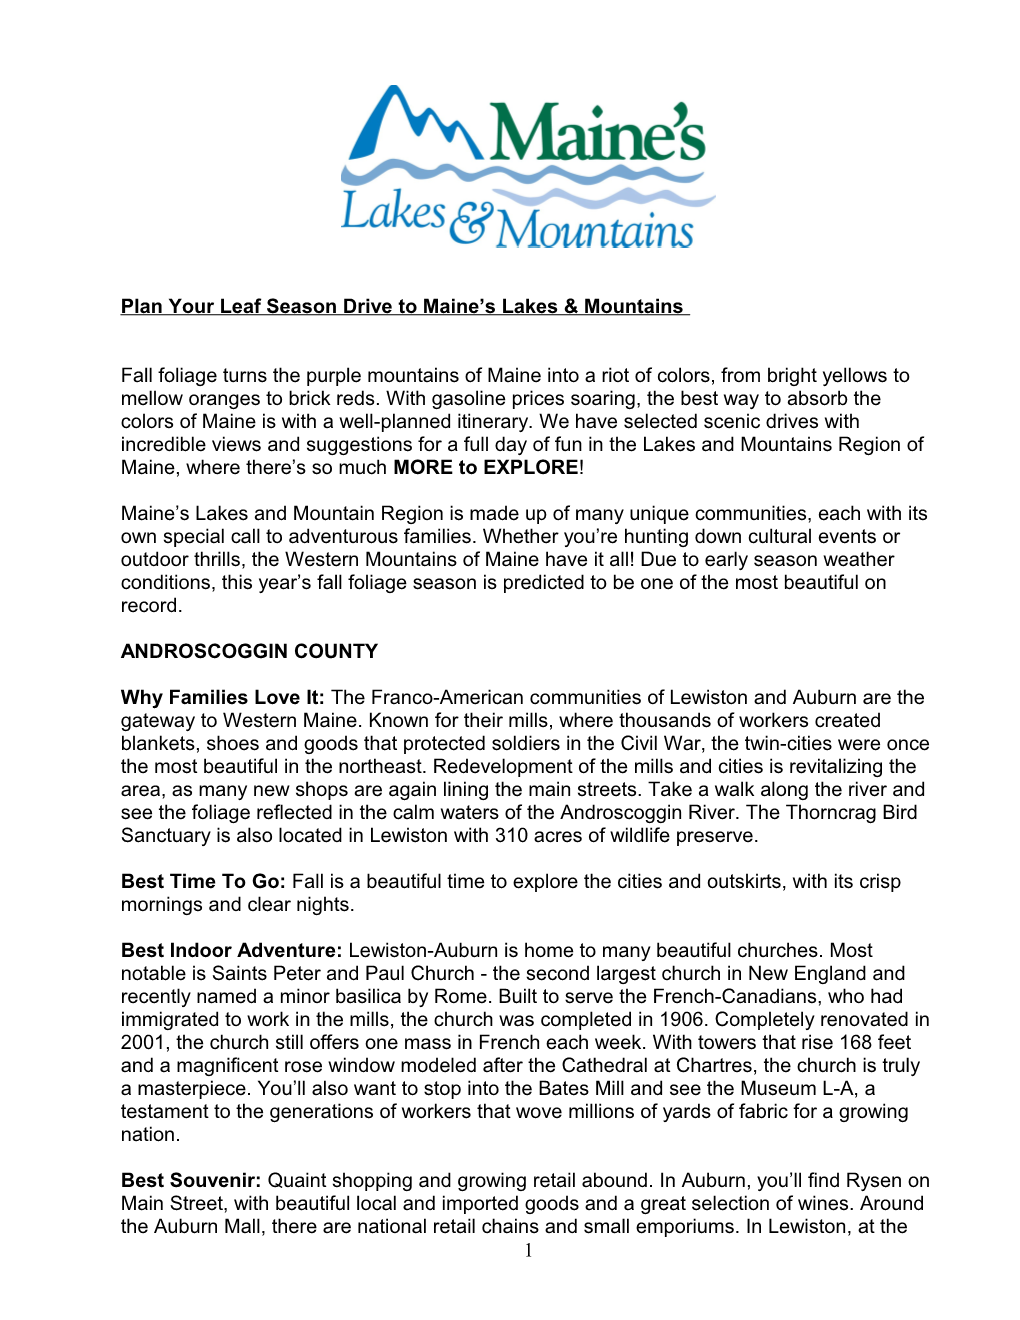 Maine S Lakes & Mountains Travel Pitch